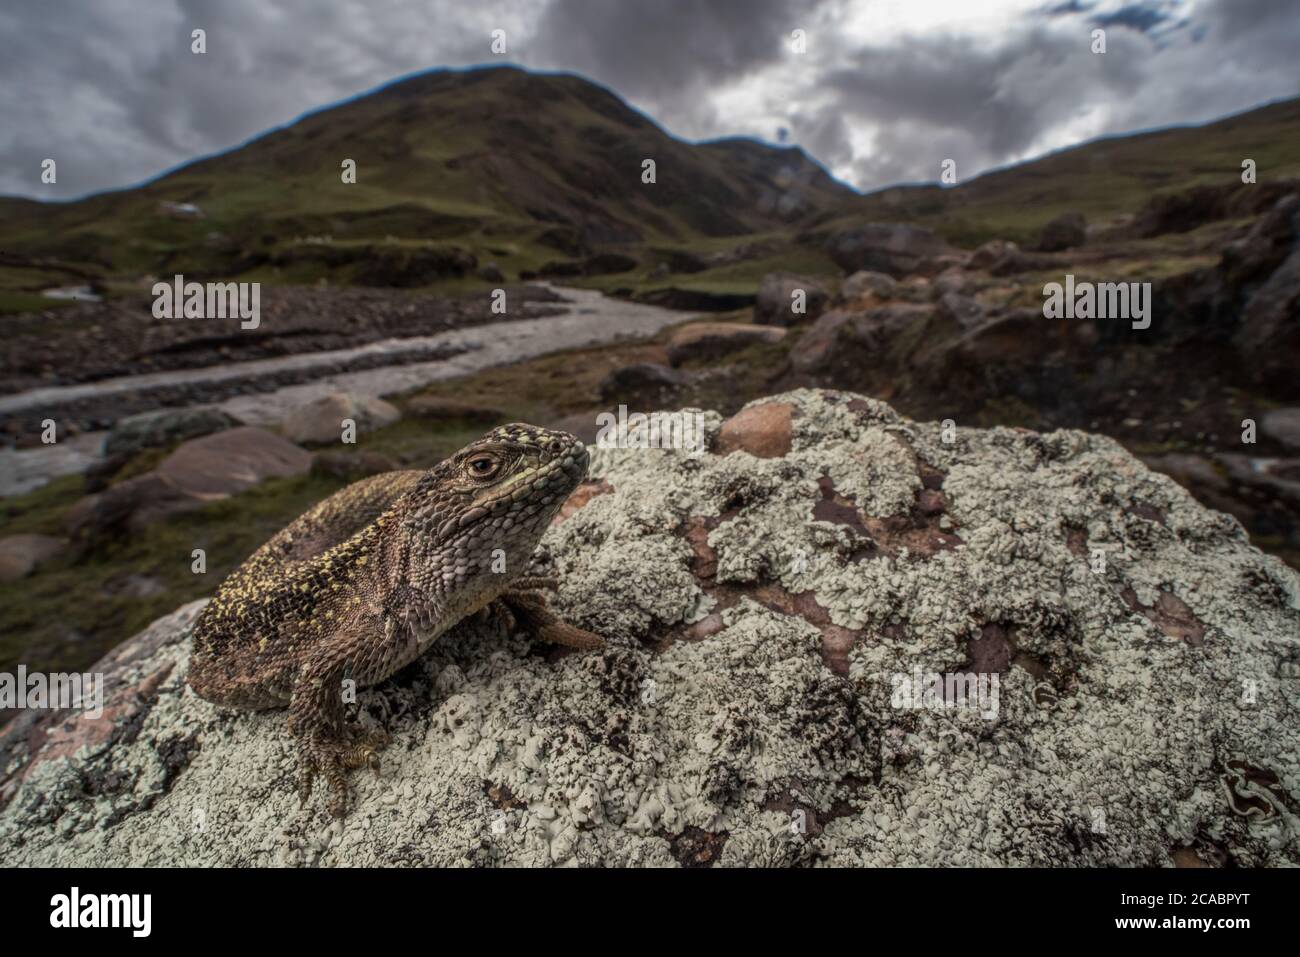 A Liolaemus lizard basks on a stone on a cold day high up in the Andes mountains where these lizards occur. Stock Photo